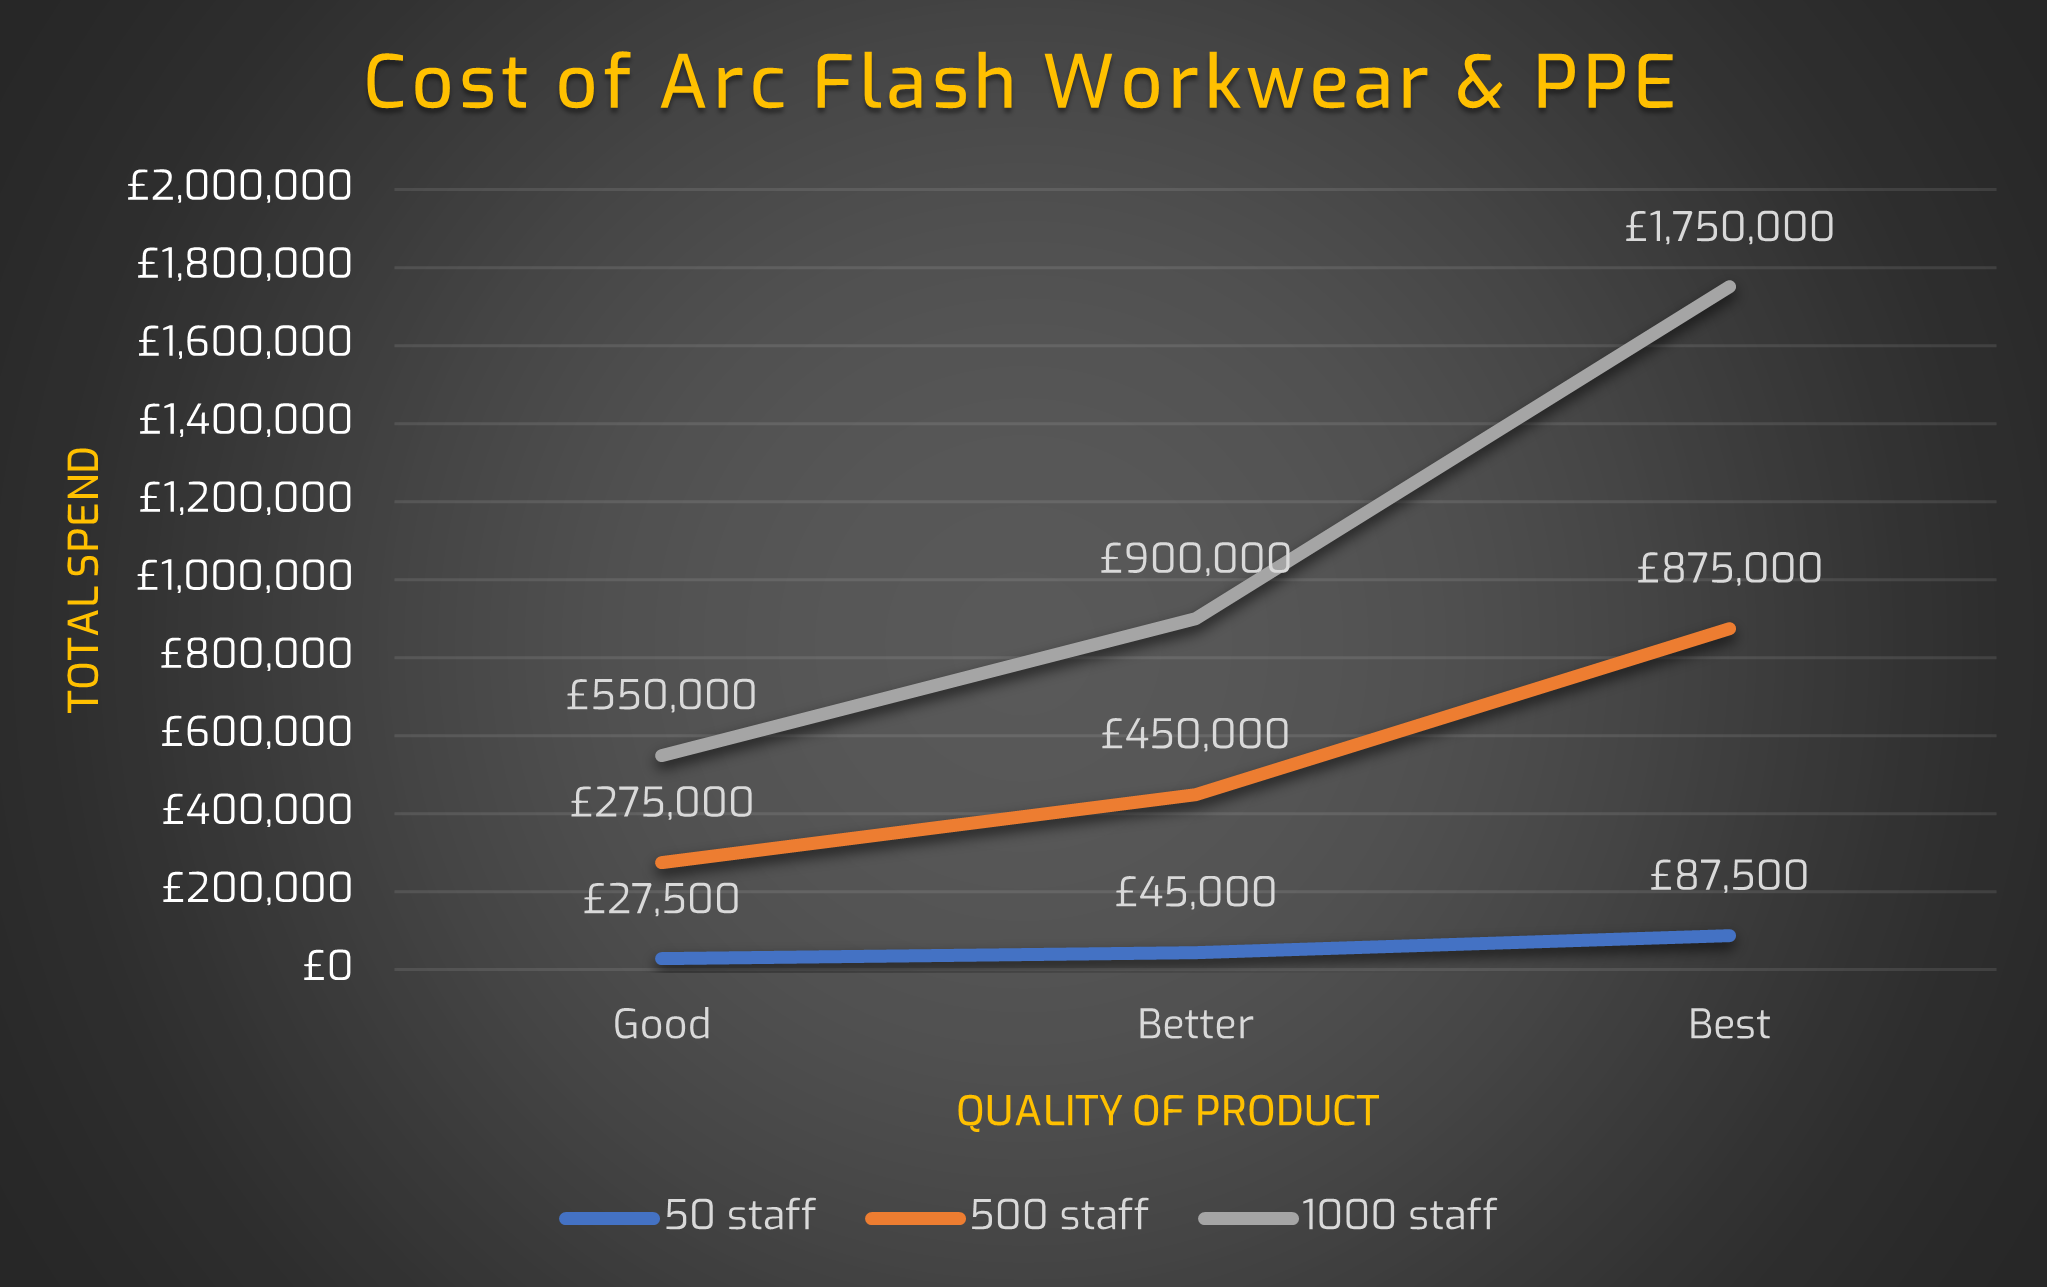 A graph showing the Minimum, Average and Maximum Arc Flash Clothing investment values, based on LION’s 3 typical quality ranges